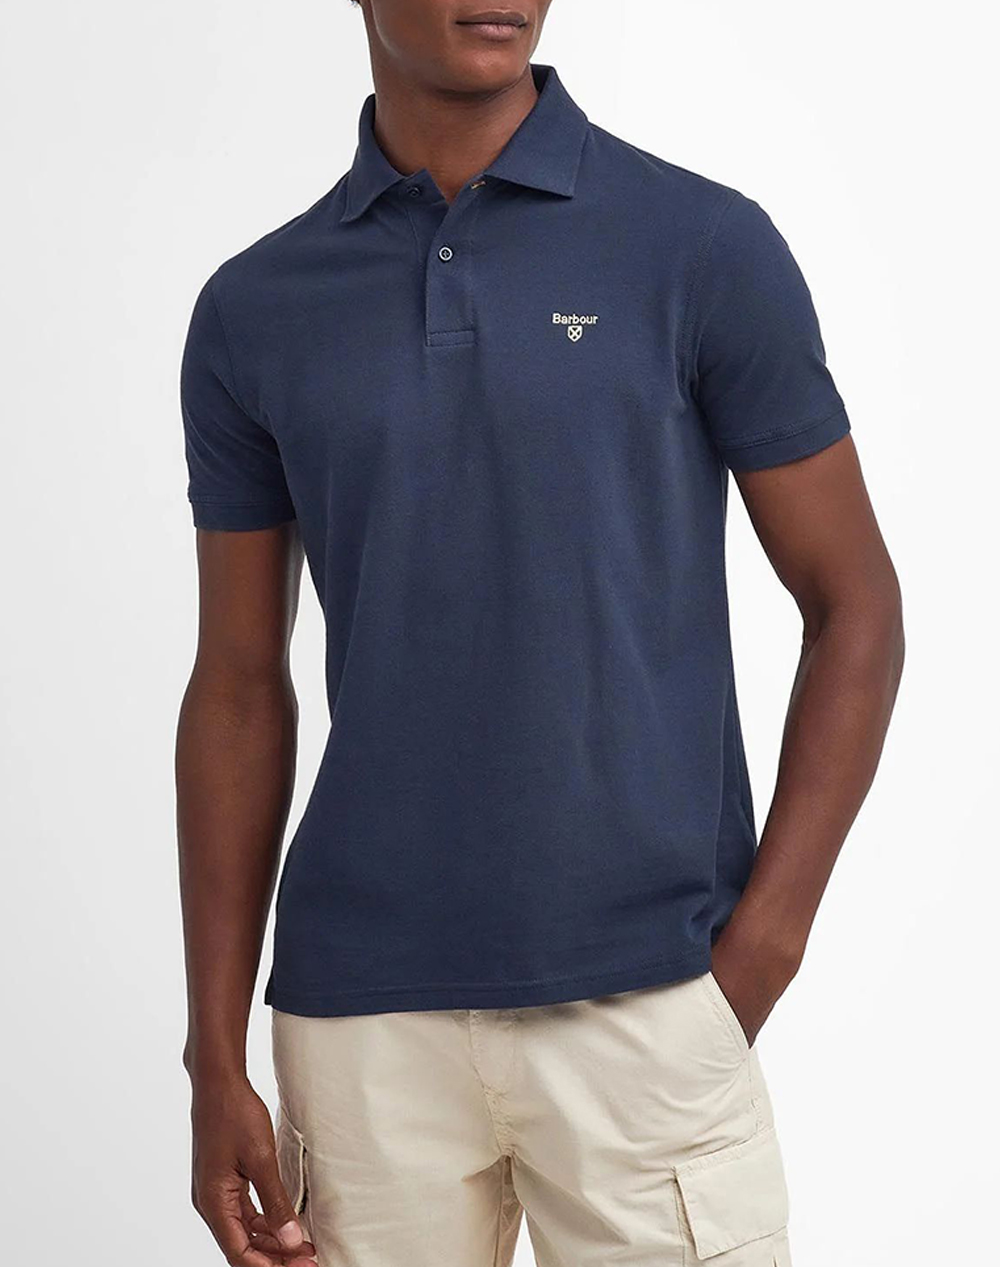 BARBOUR BARBOUR LIGHTWEIGHT SPORTS POLO ΜΠΛΟΥΖΑ POLO MML1367-BRNY91 NavyBlue